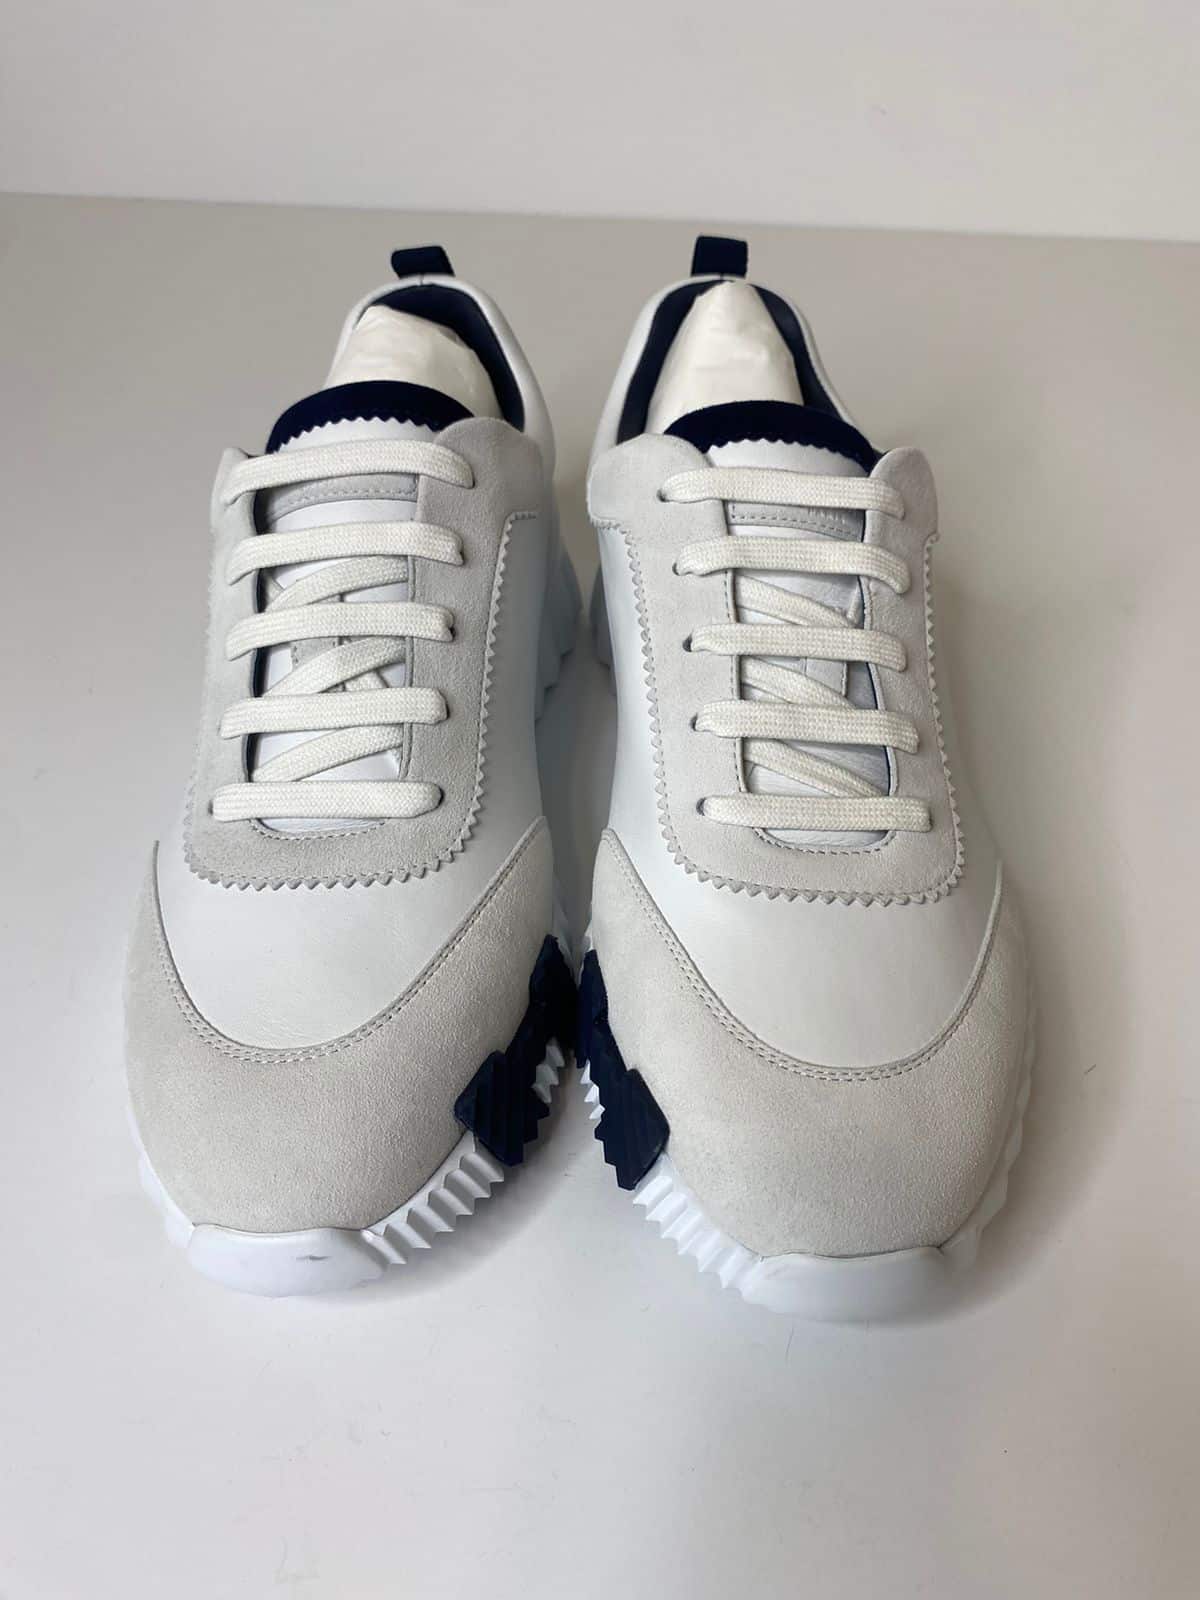 Hermes Bouncing Sneaker Navy blue/white Size 42 | The Luxury Flavor